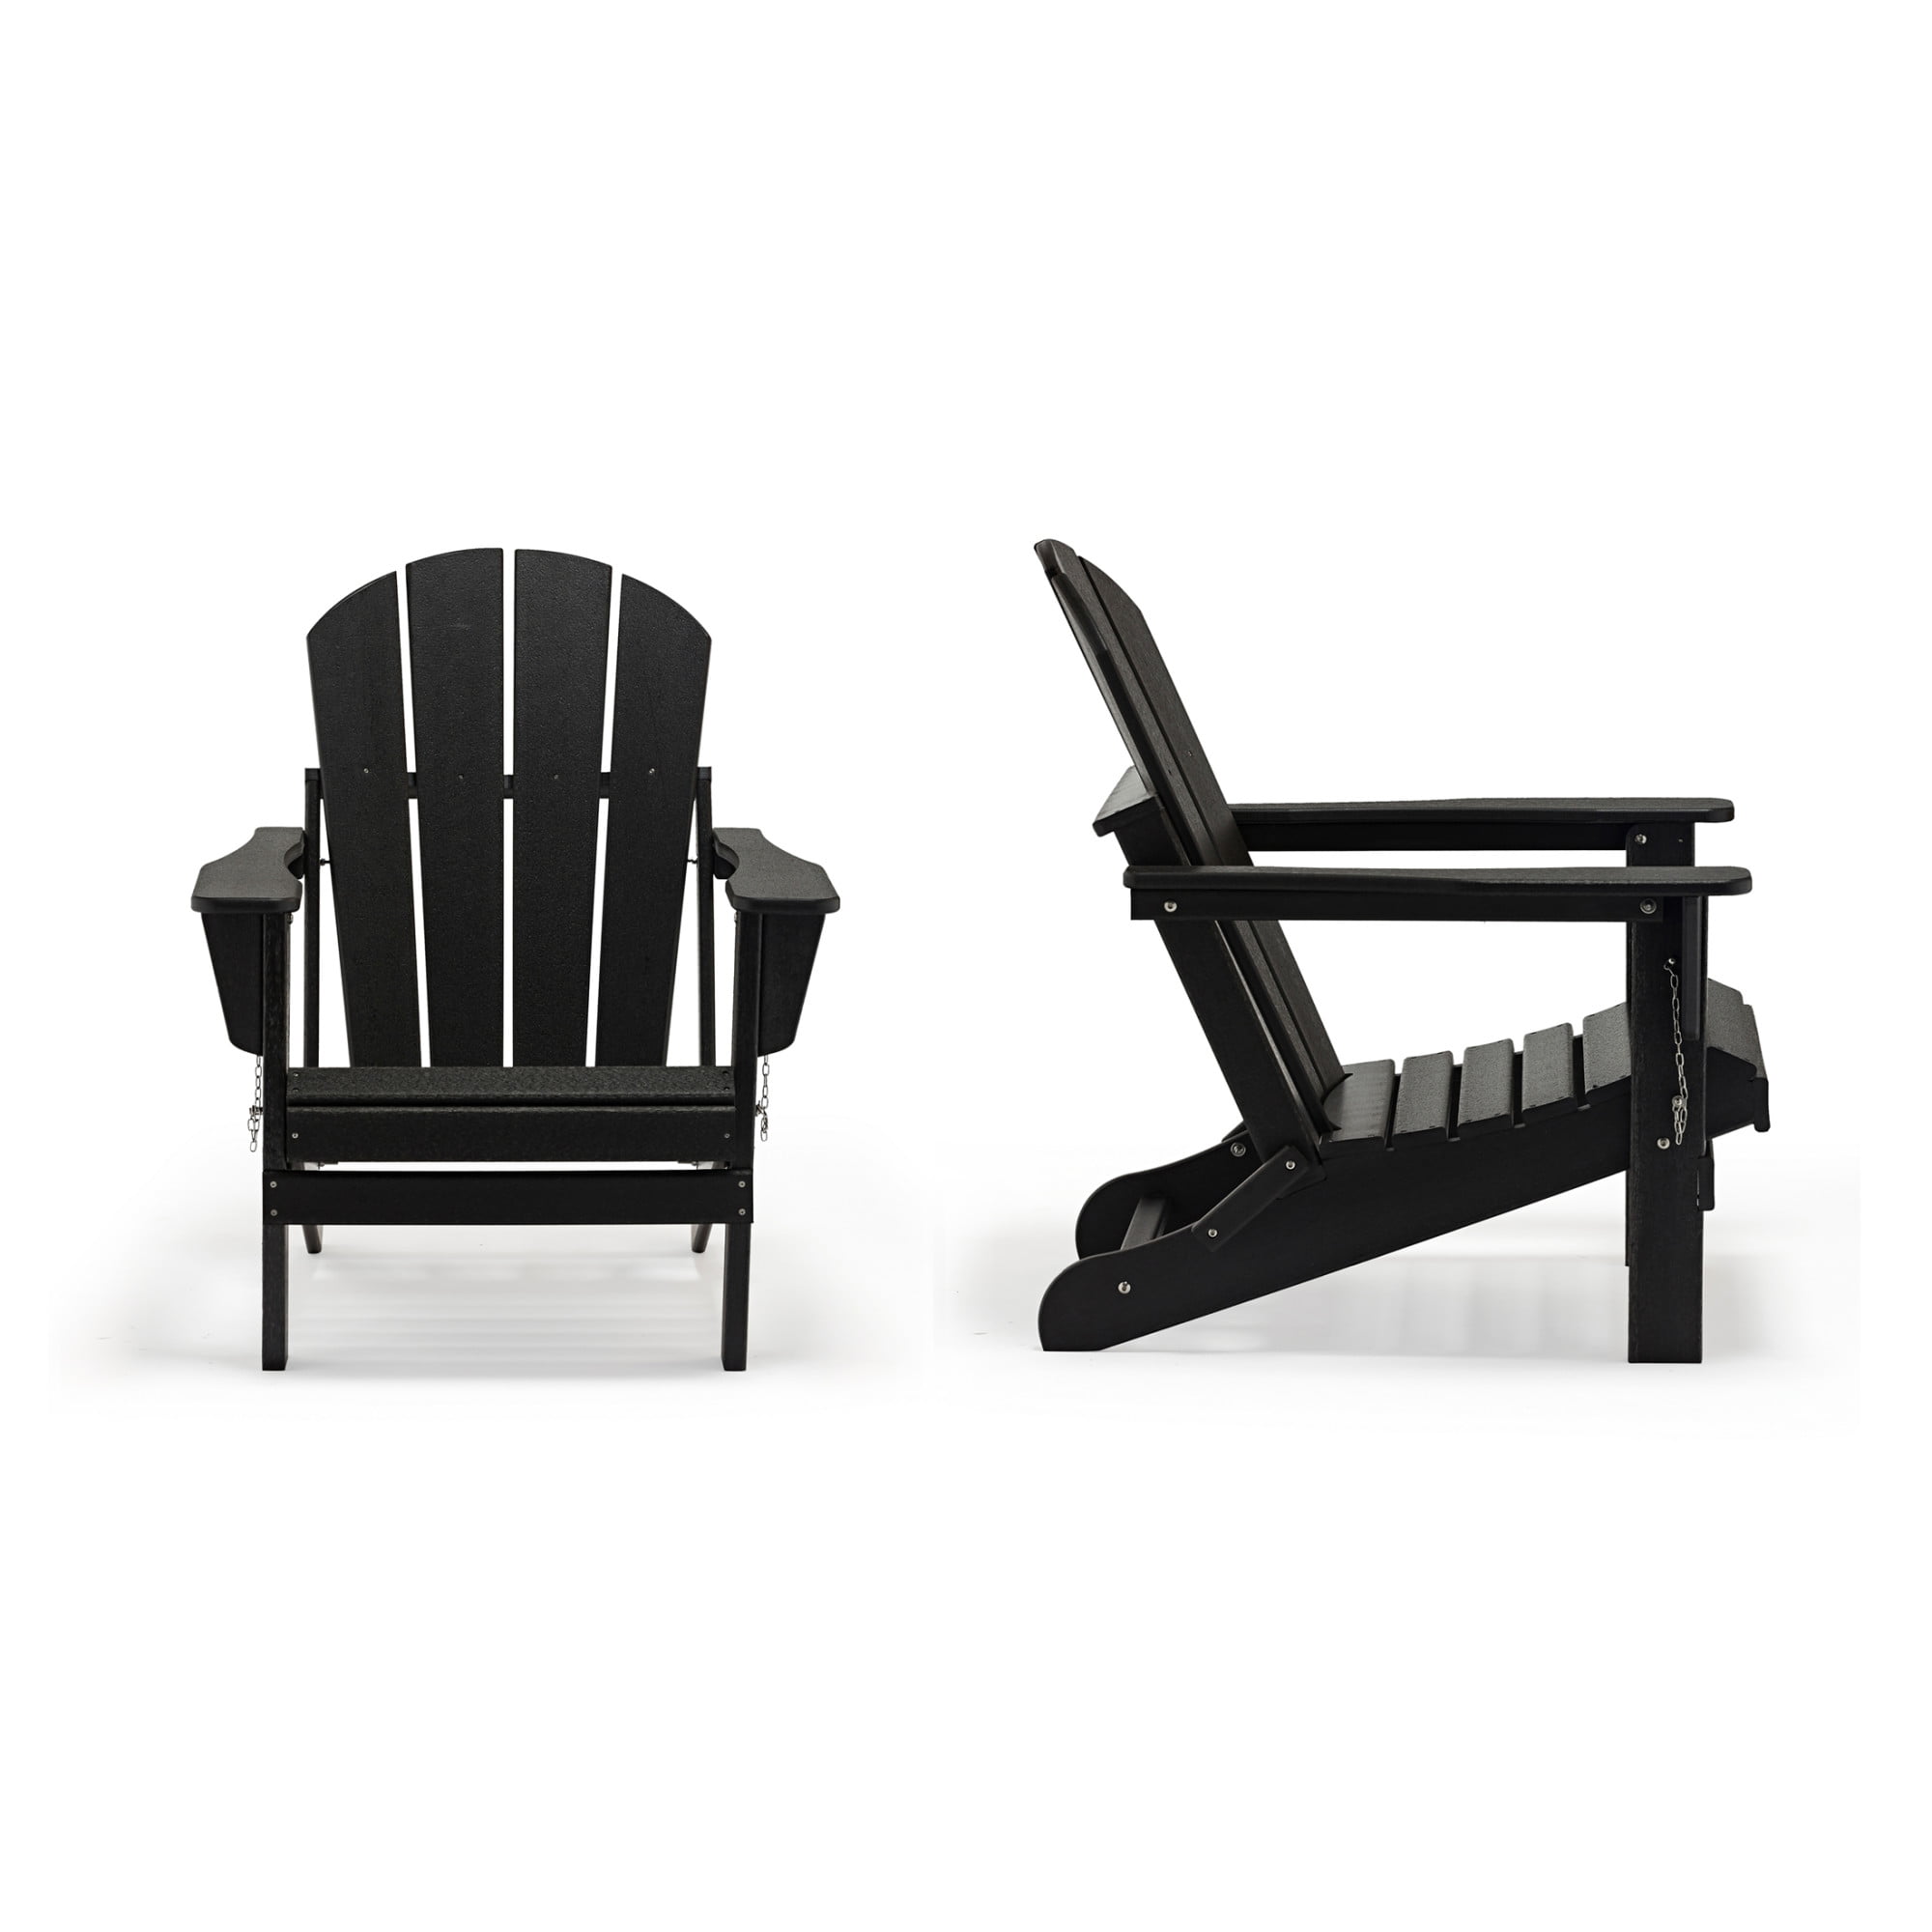 For Outdoor Patio Furniture Chairs, Black Plastic Outdoor Adirondack Chairs